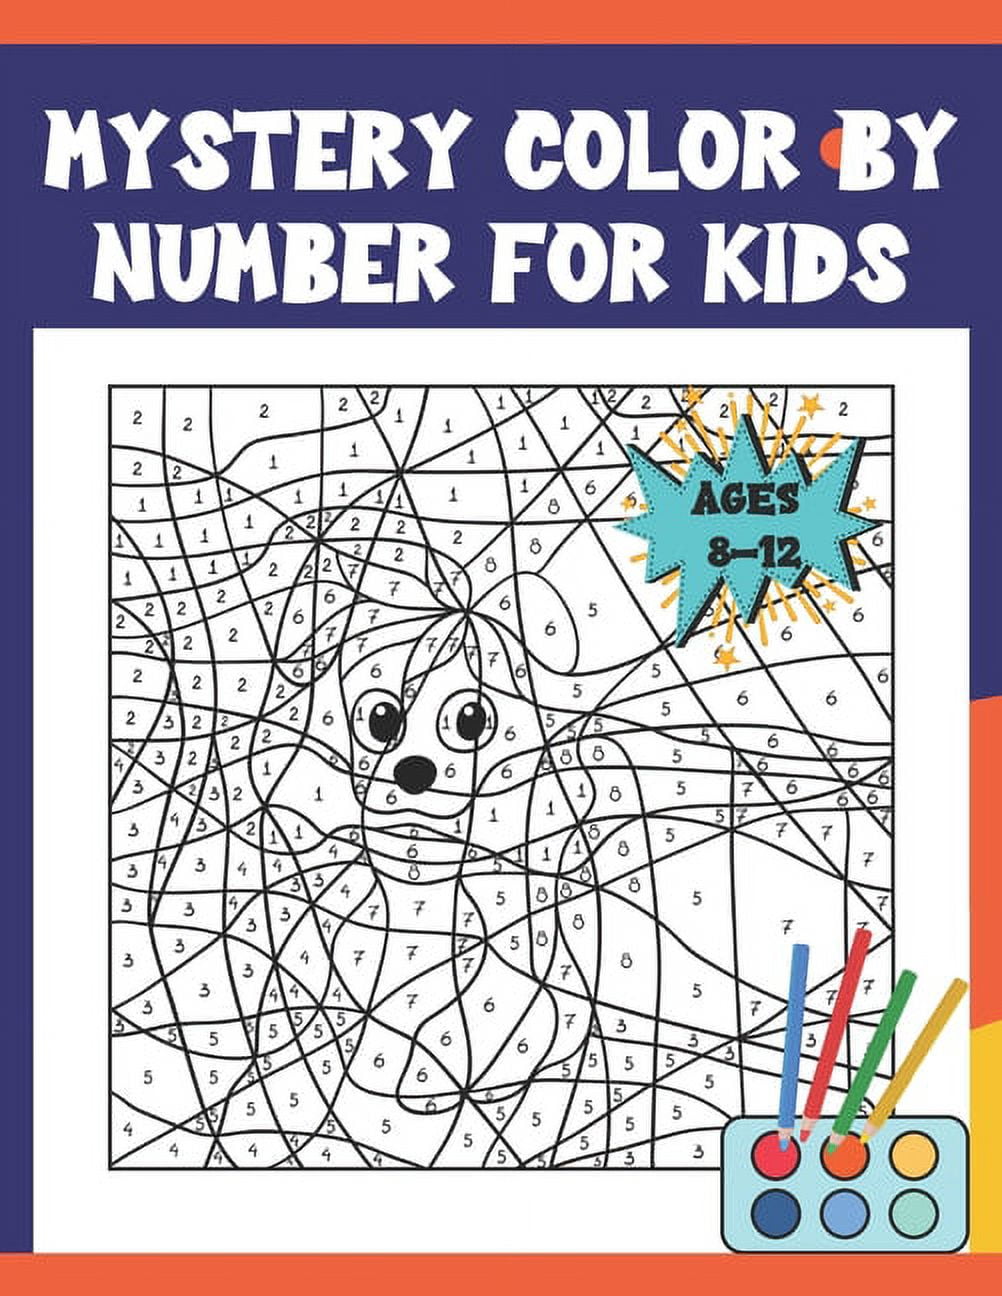 2 Crayon By Number Creative Kids ages 6+ new Quiet Travel Rainy Day